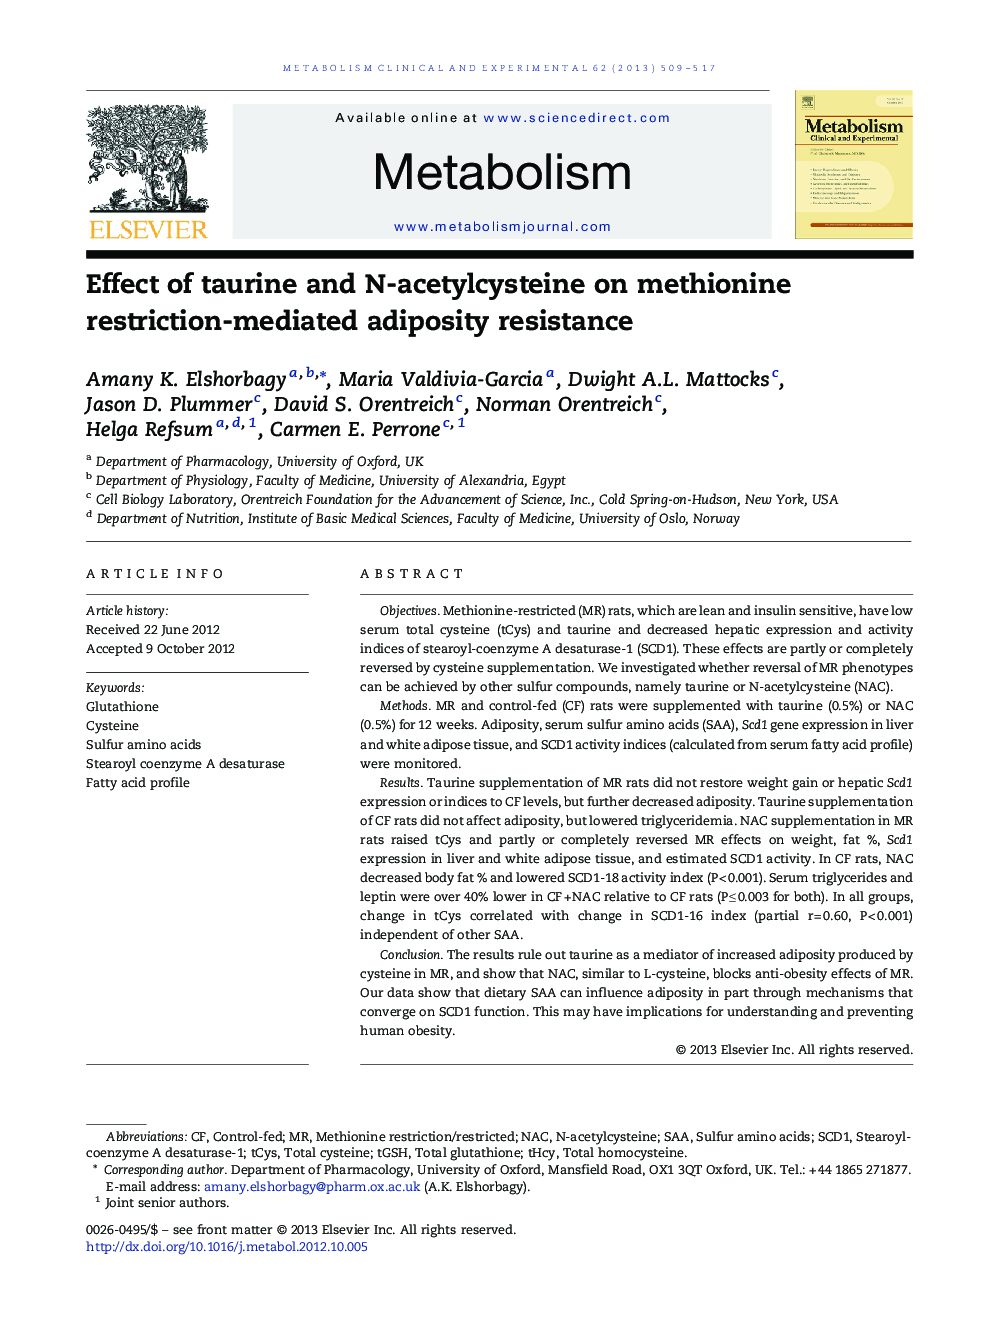 Effect of taurine and N-acetylcysteine on methionine restriction-mediated adiposity resistance